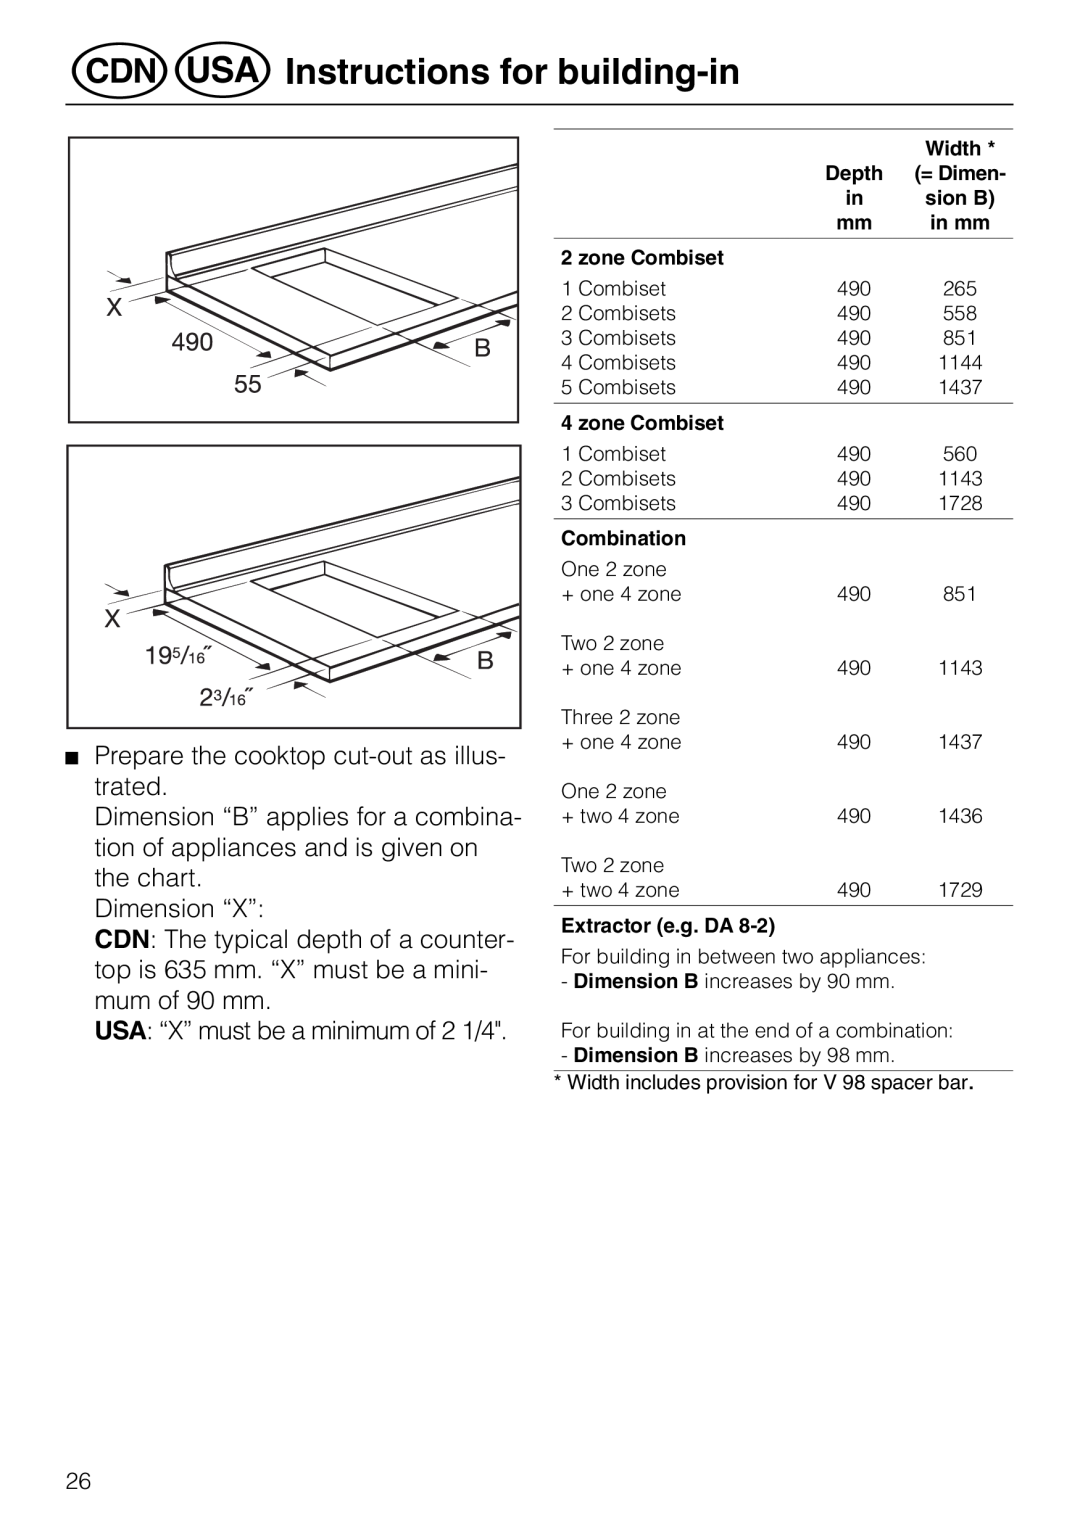 Miele KM 81-2 operating instructions öInstructions for building-in, Prepare the cooktop cut-outas illus- trated 